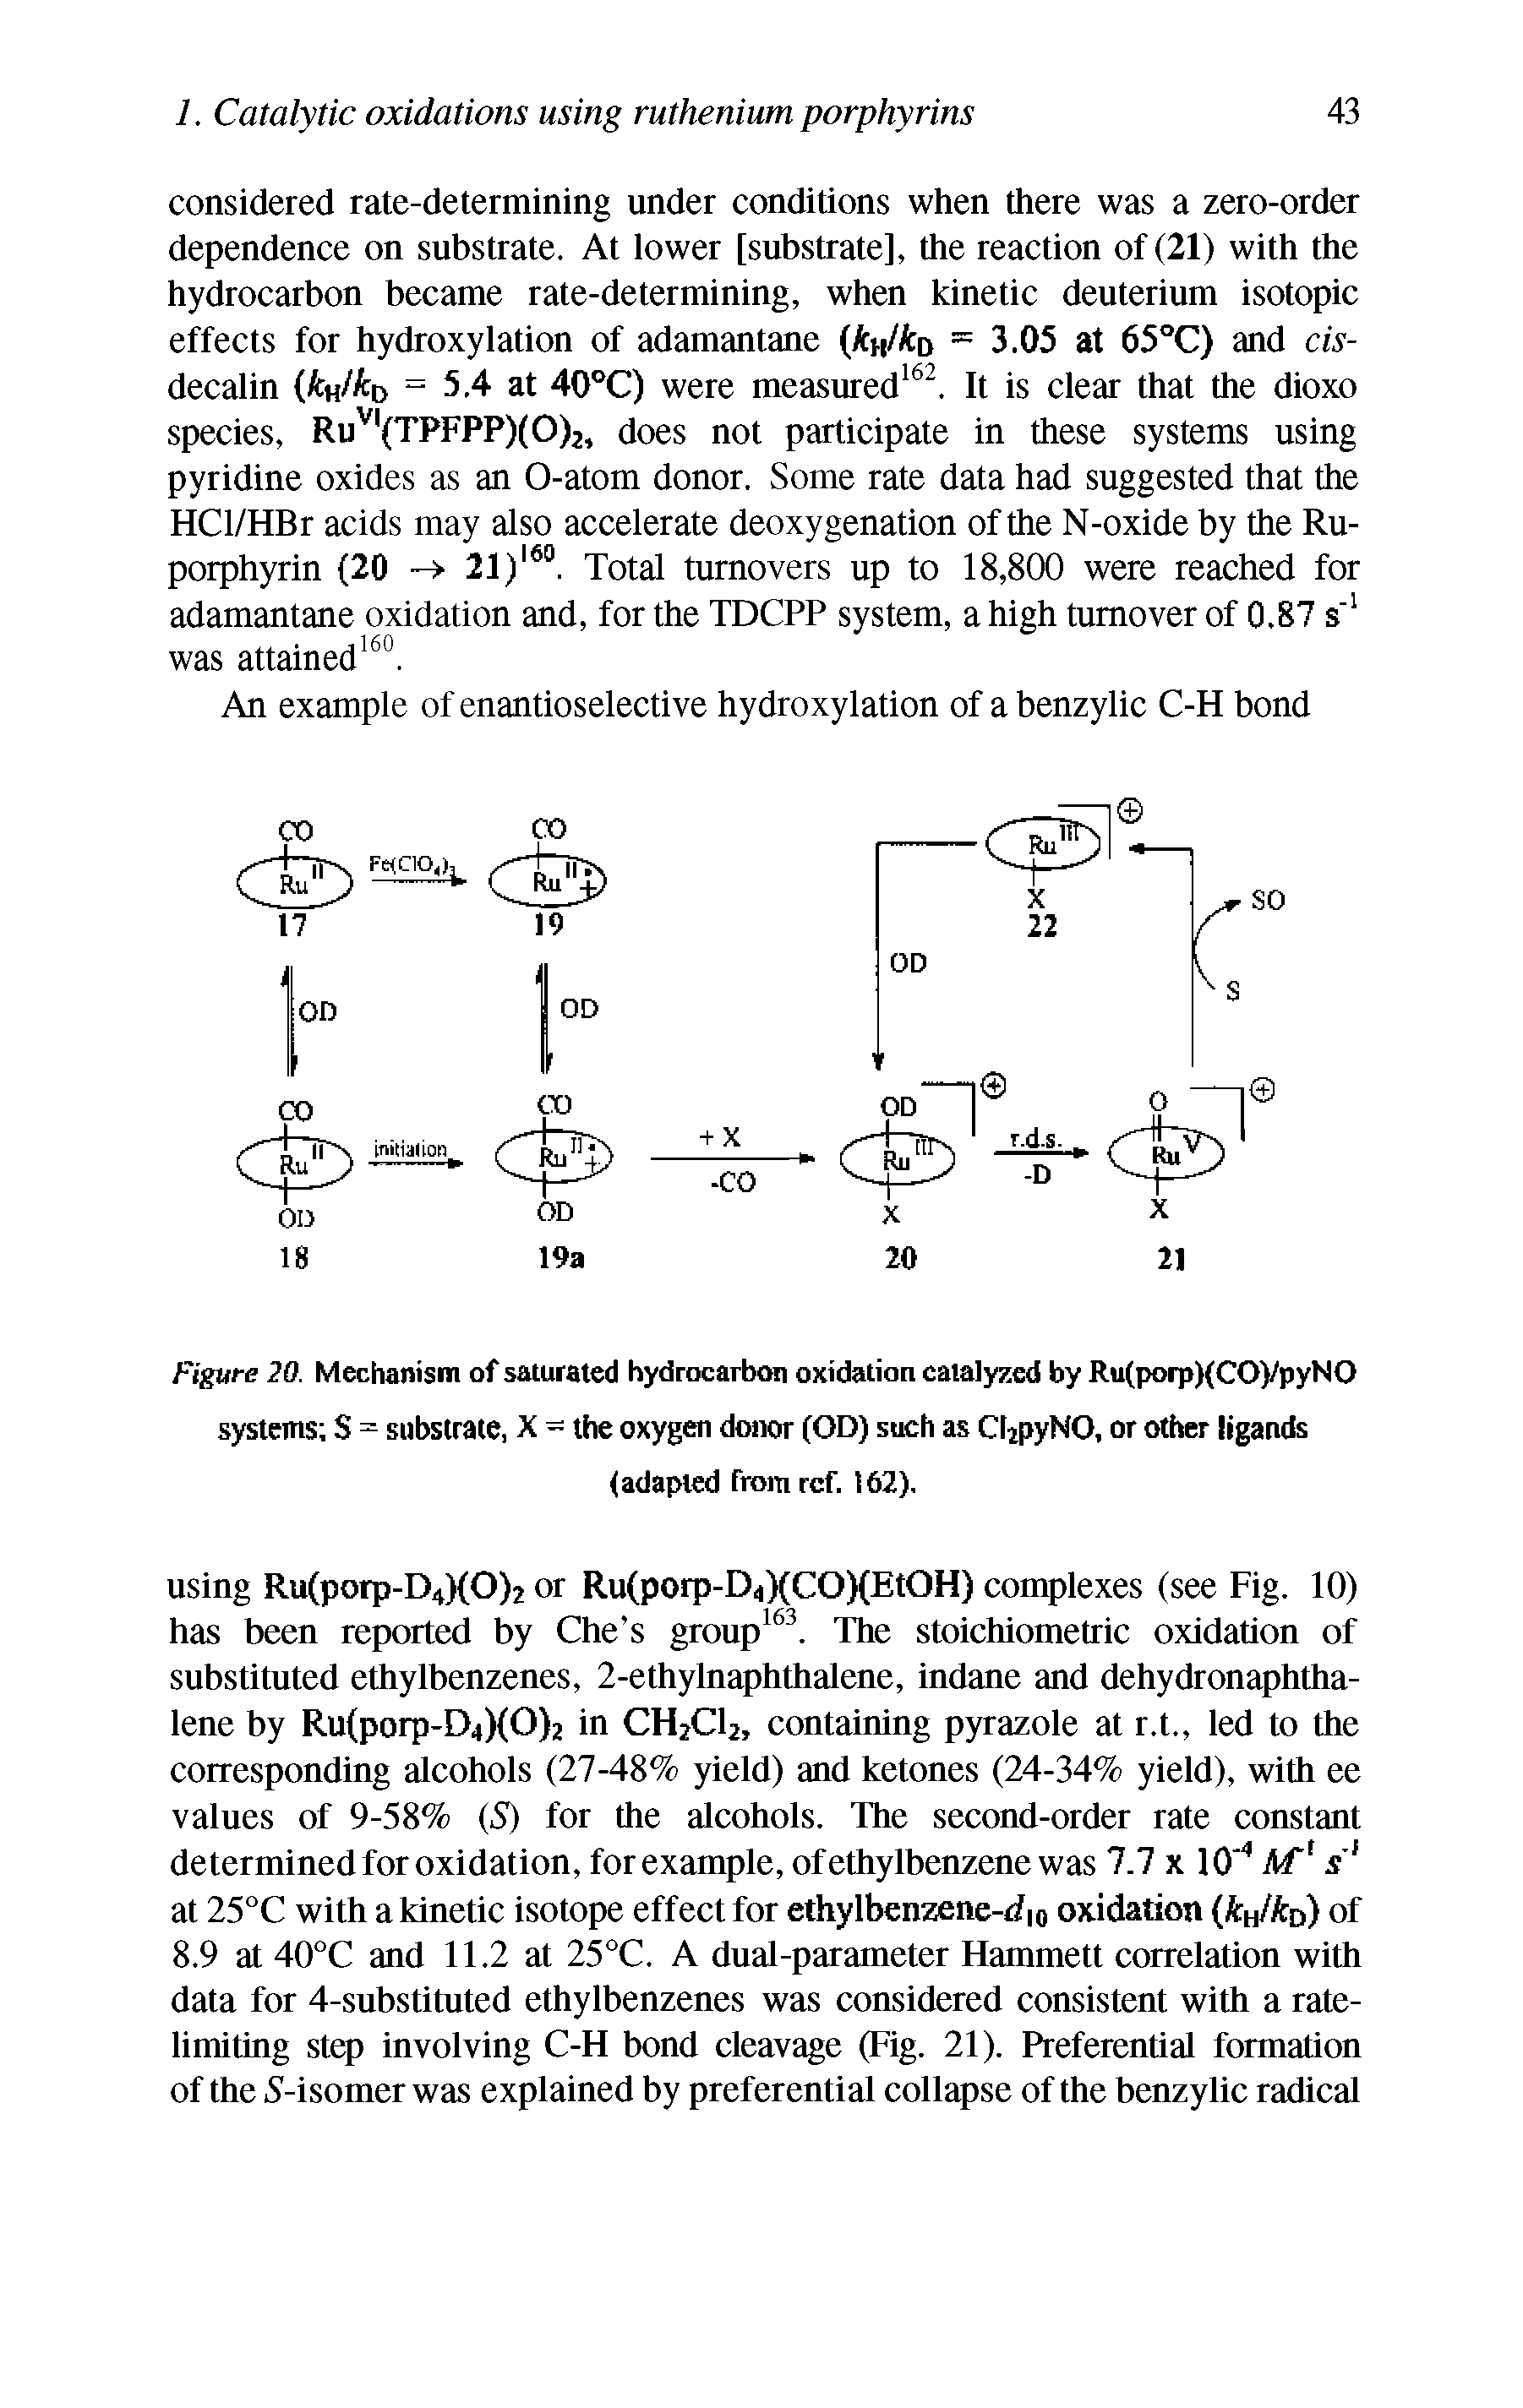 Figure 20. Mechanism of saturated hydrocarbon oxidation catalyzed by Ru(porp)(CO)/pyNO systems S = substrate, X = the oxygen donor (OD) such as ChpyNO, or other ligands...